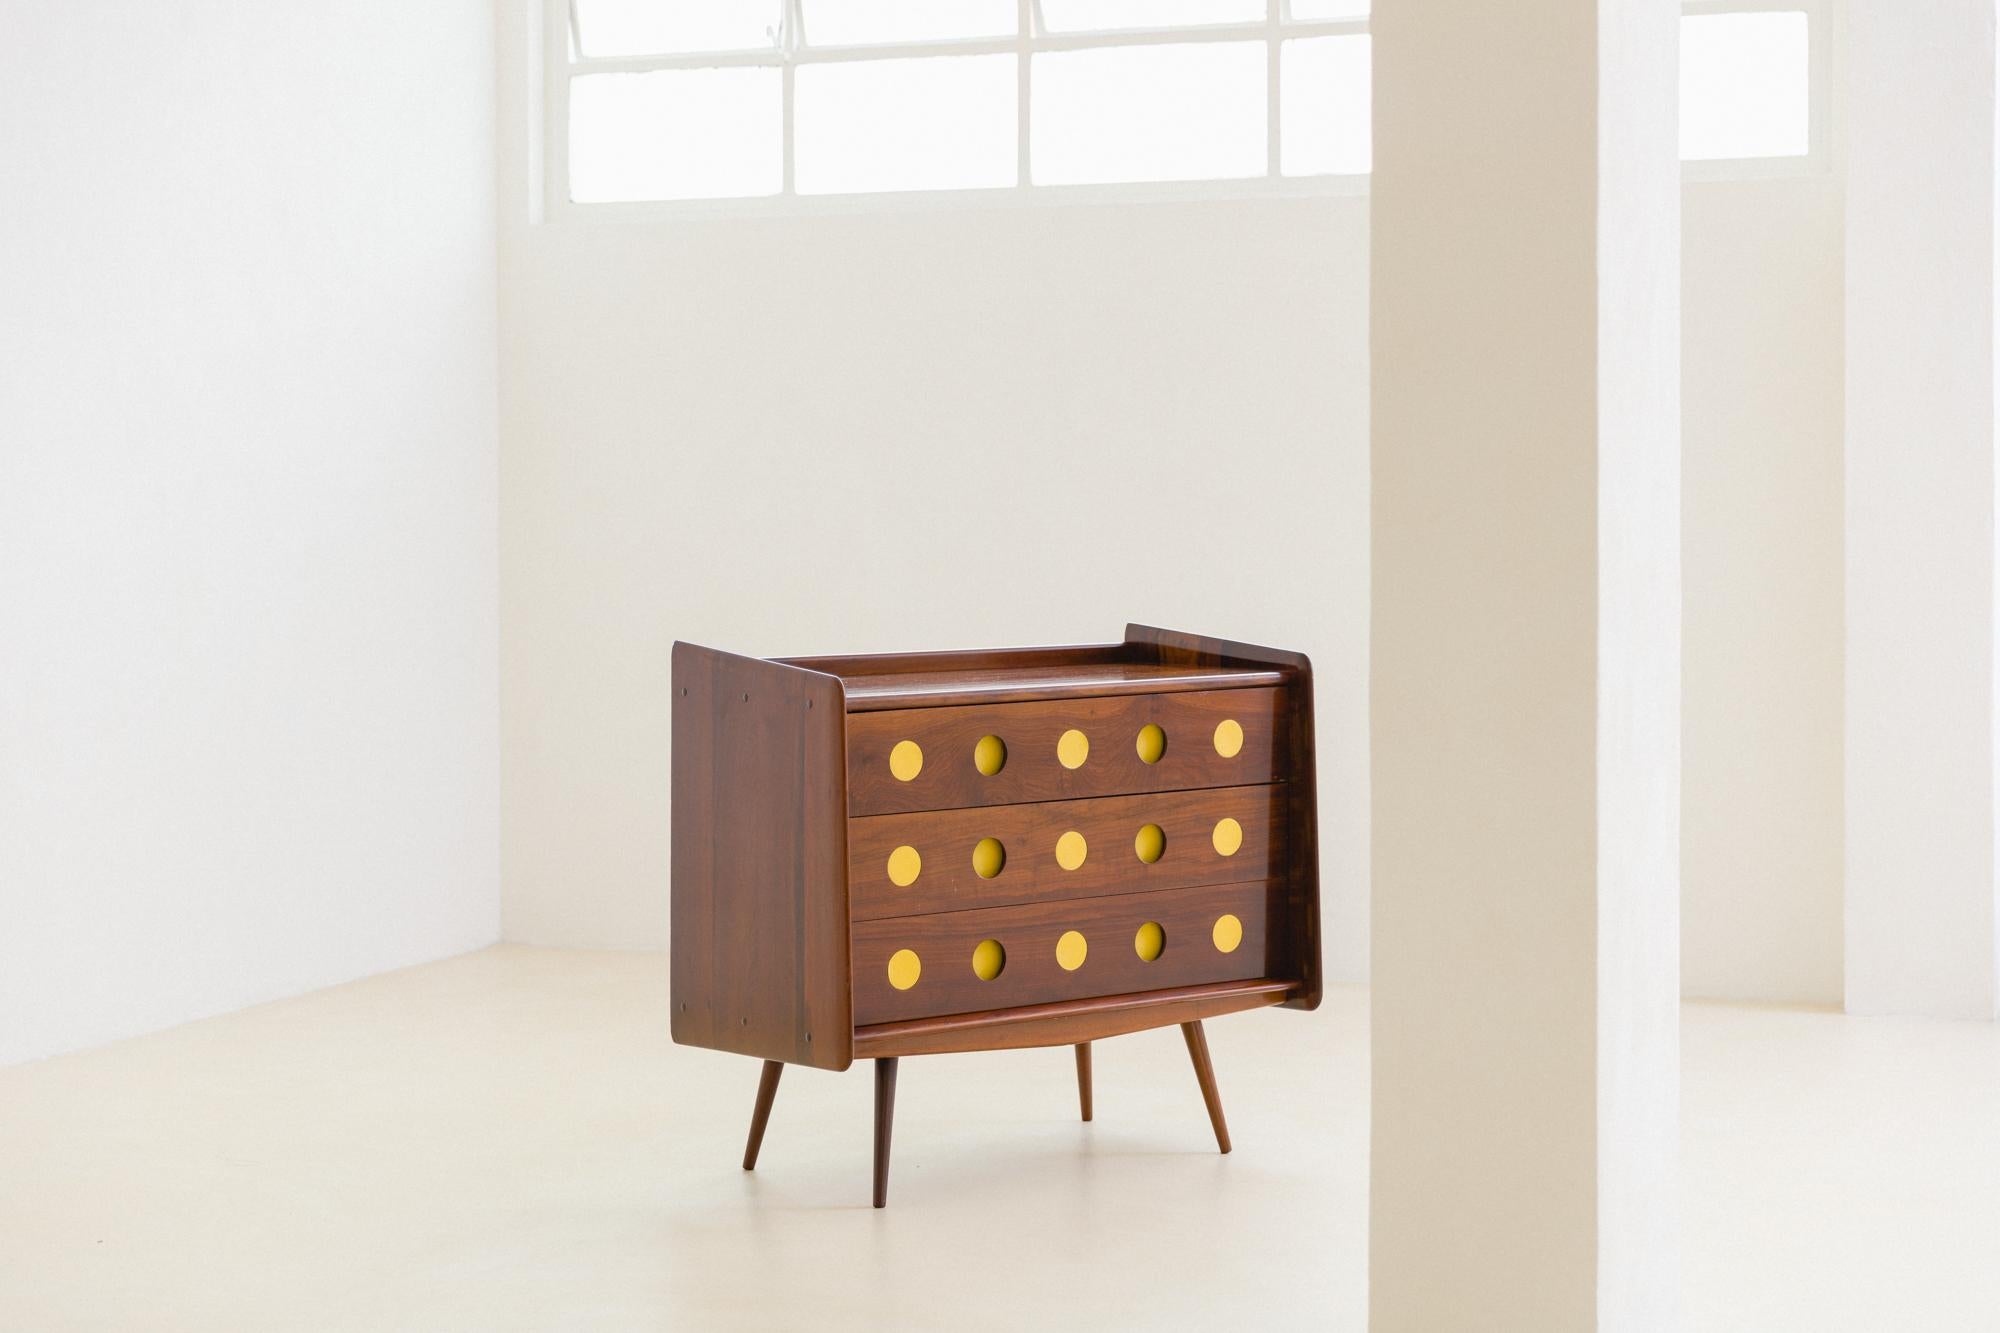 Mid-Century Modern Dresser in Brazilian Imbuia Wood by Móveis Cimo, Mid-Century Design, 1960s For Sale